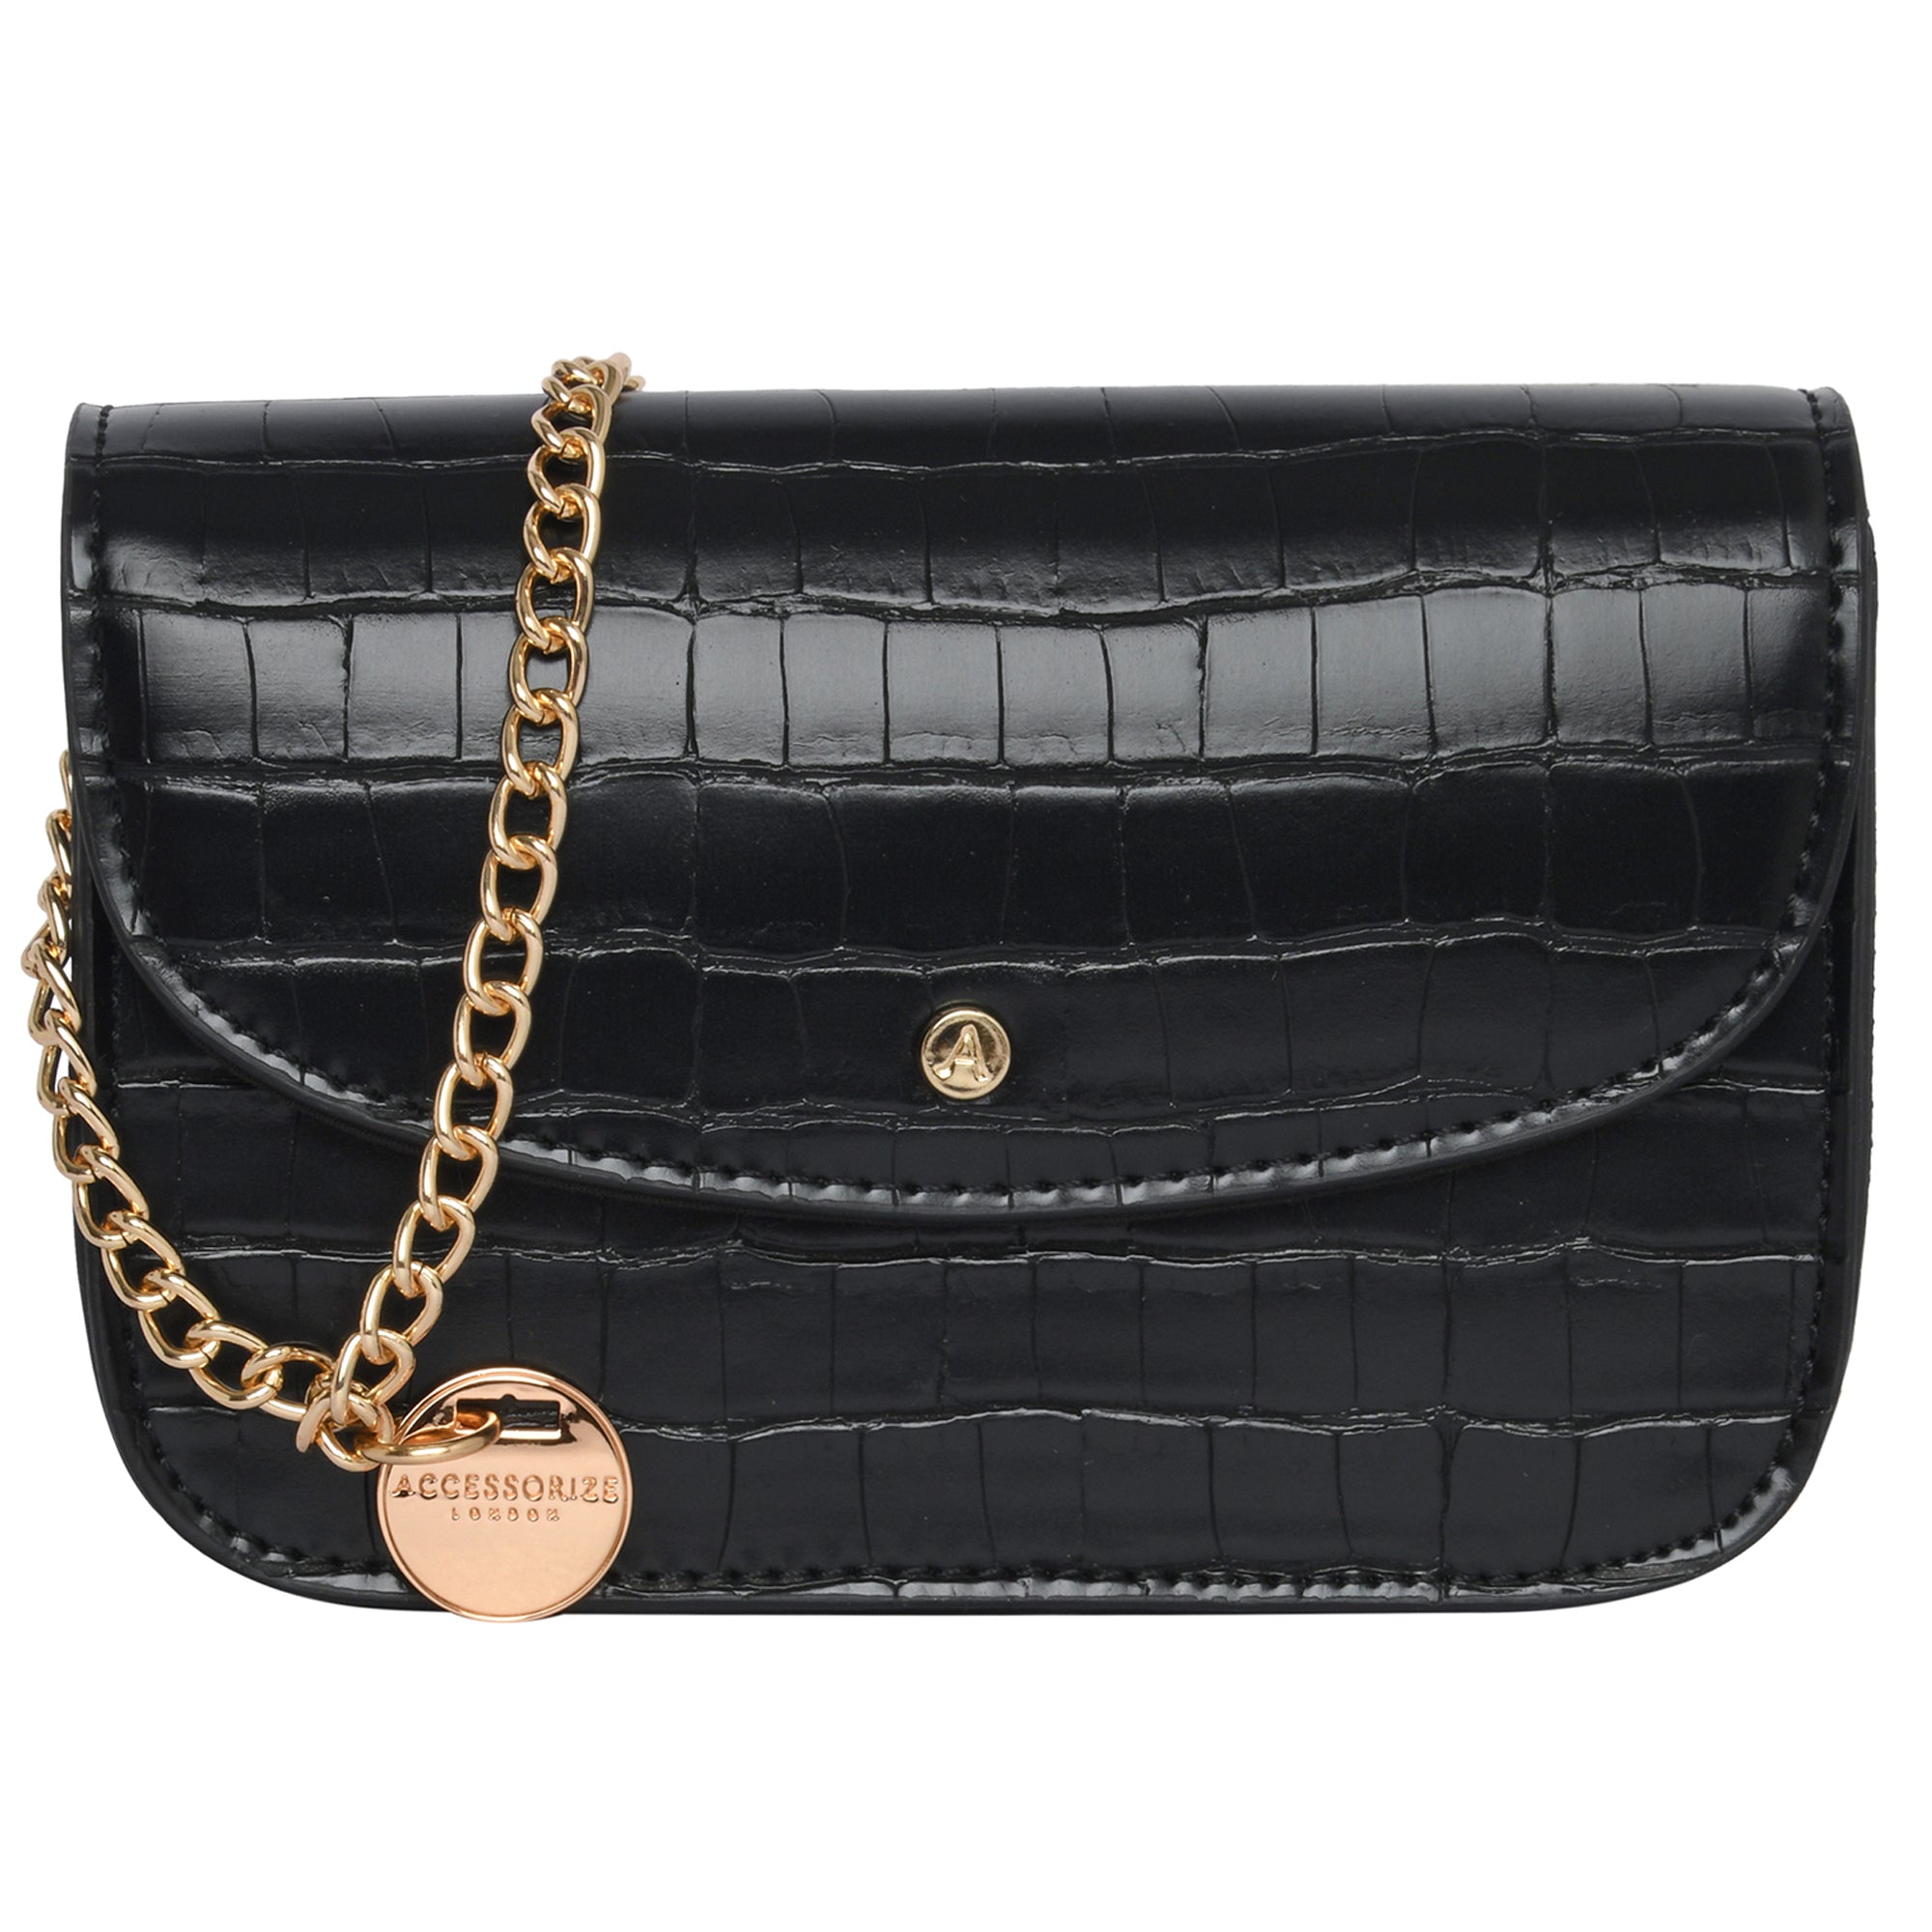 Timeless/classique leather mini bag Chanel Black in Leather - 39311129